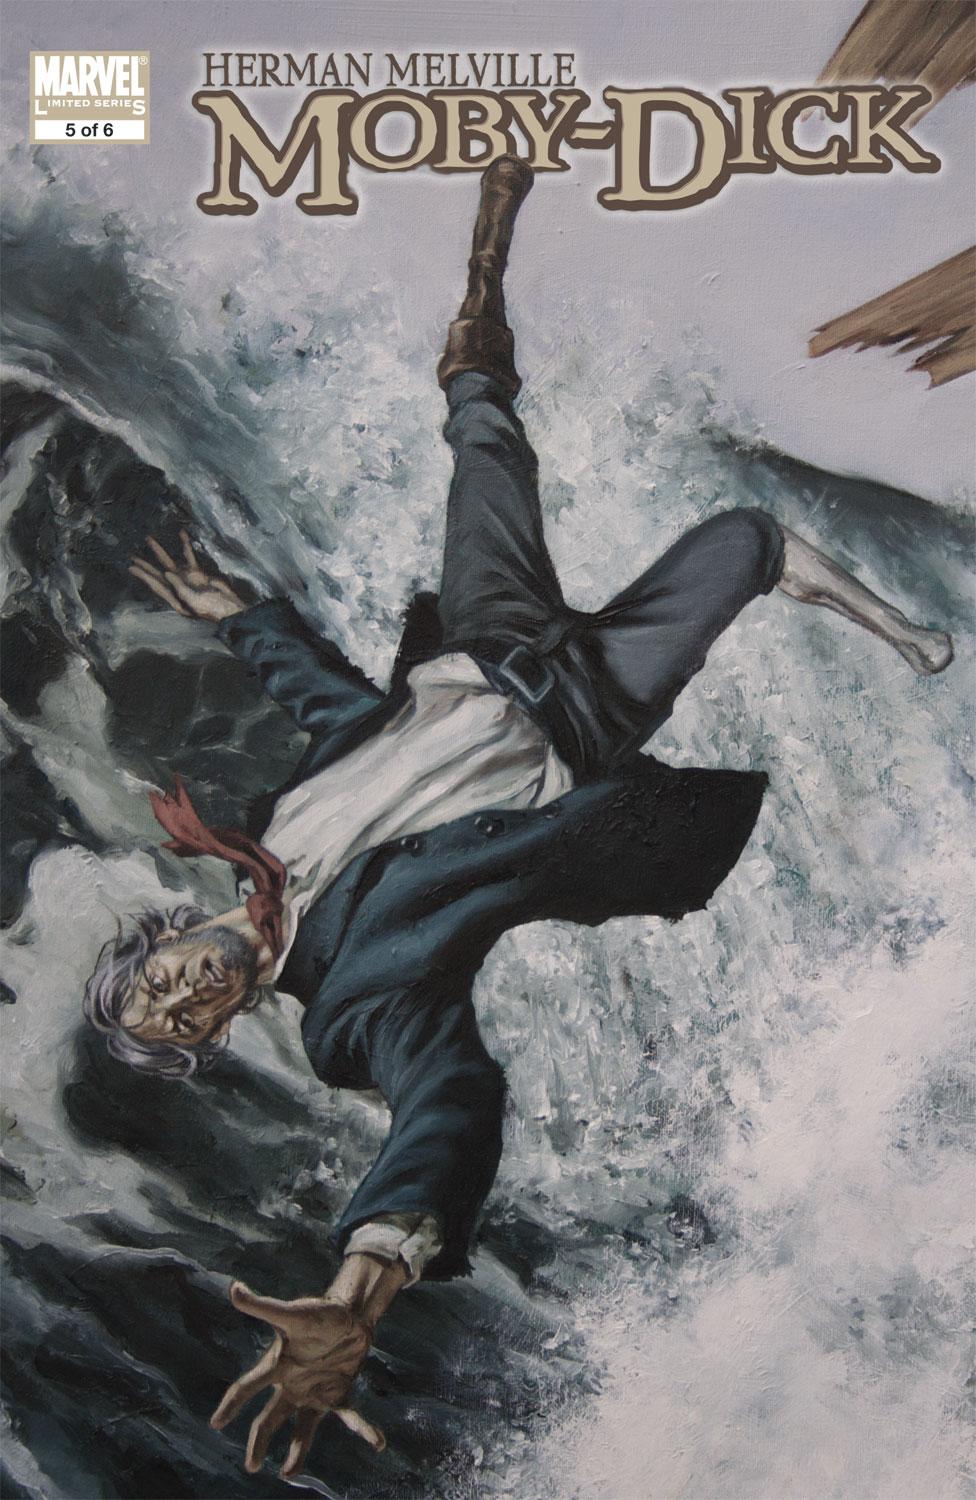 Marvel Illustrated: Moby Dick (2007) #5